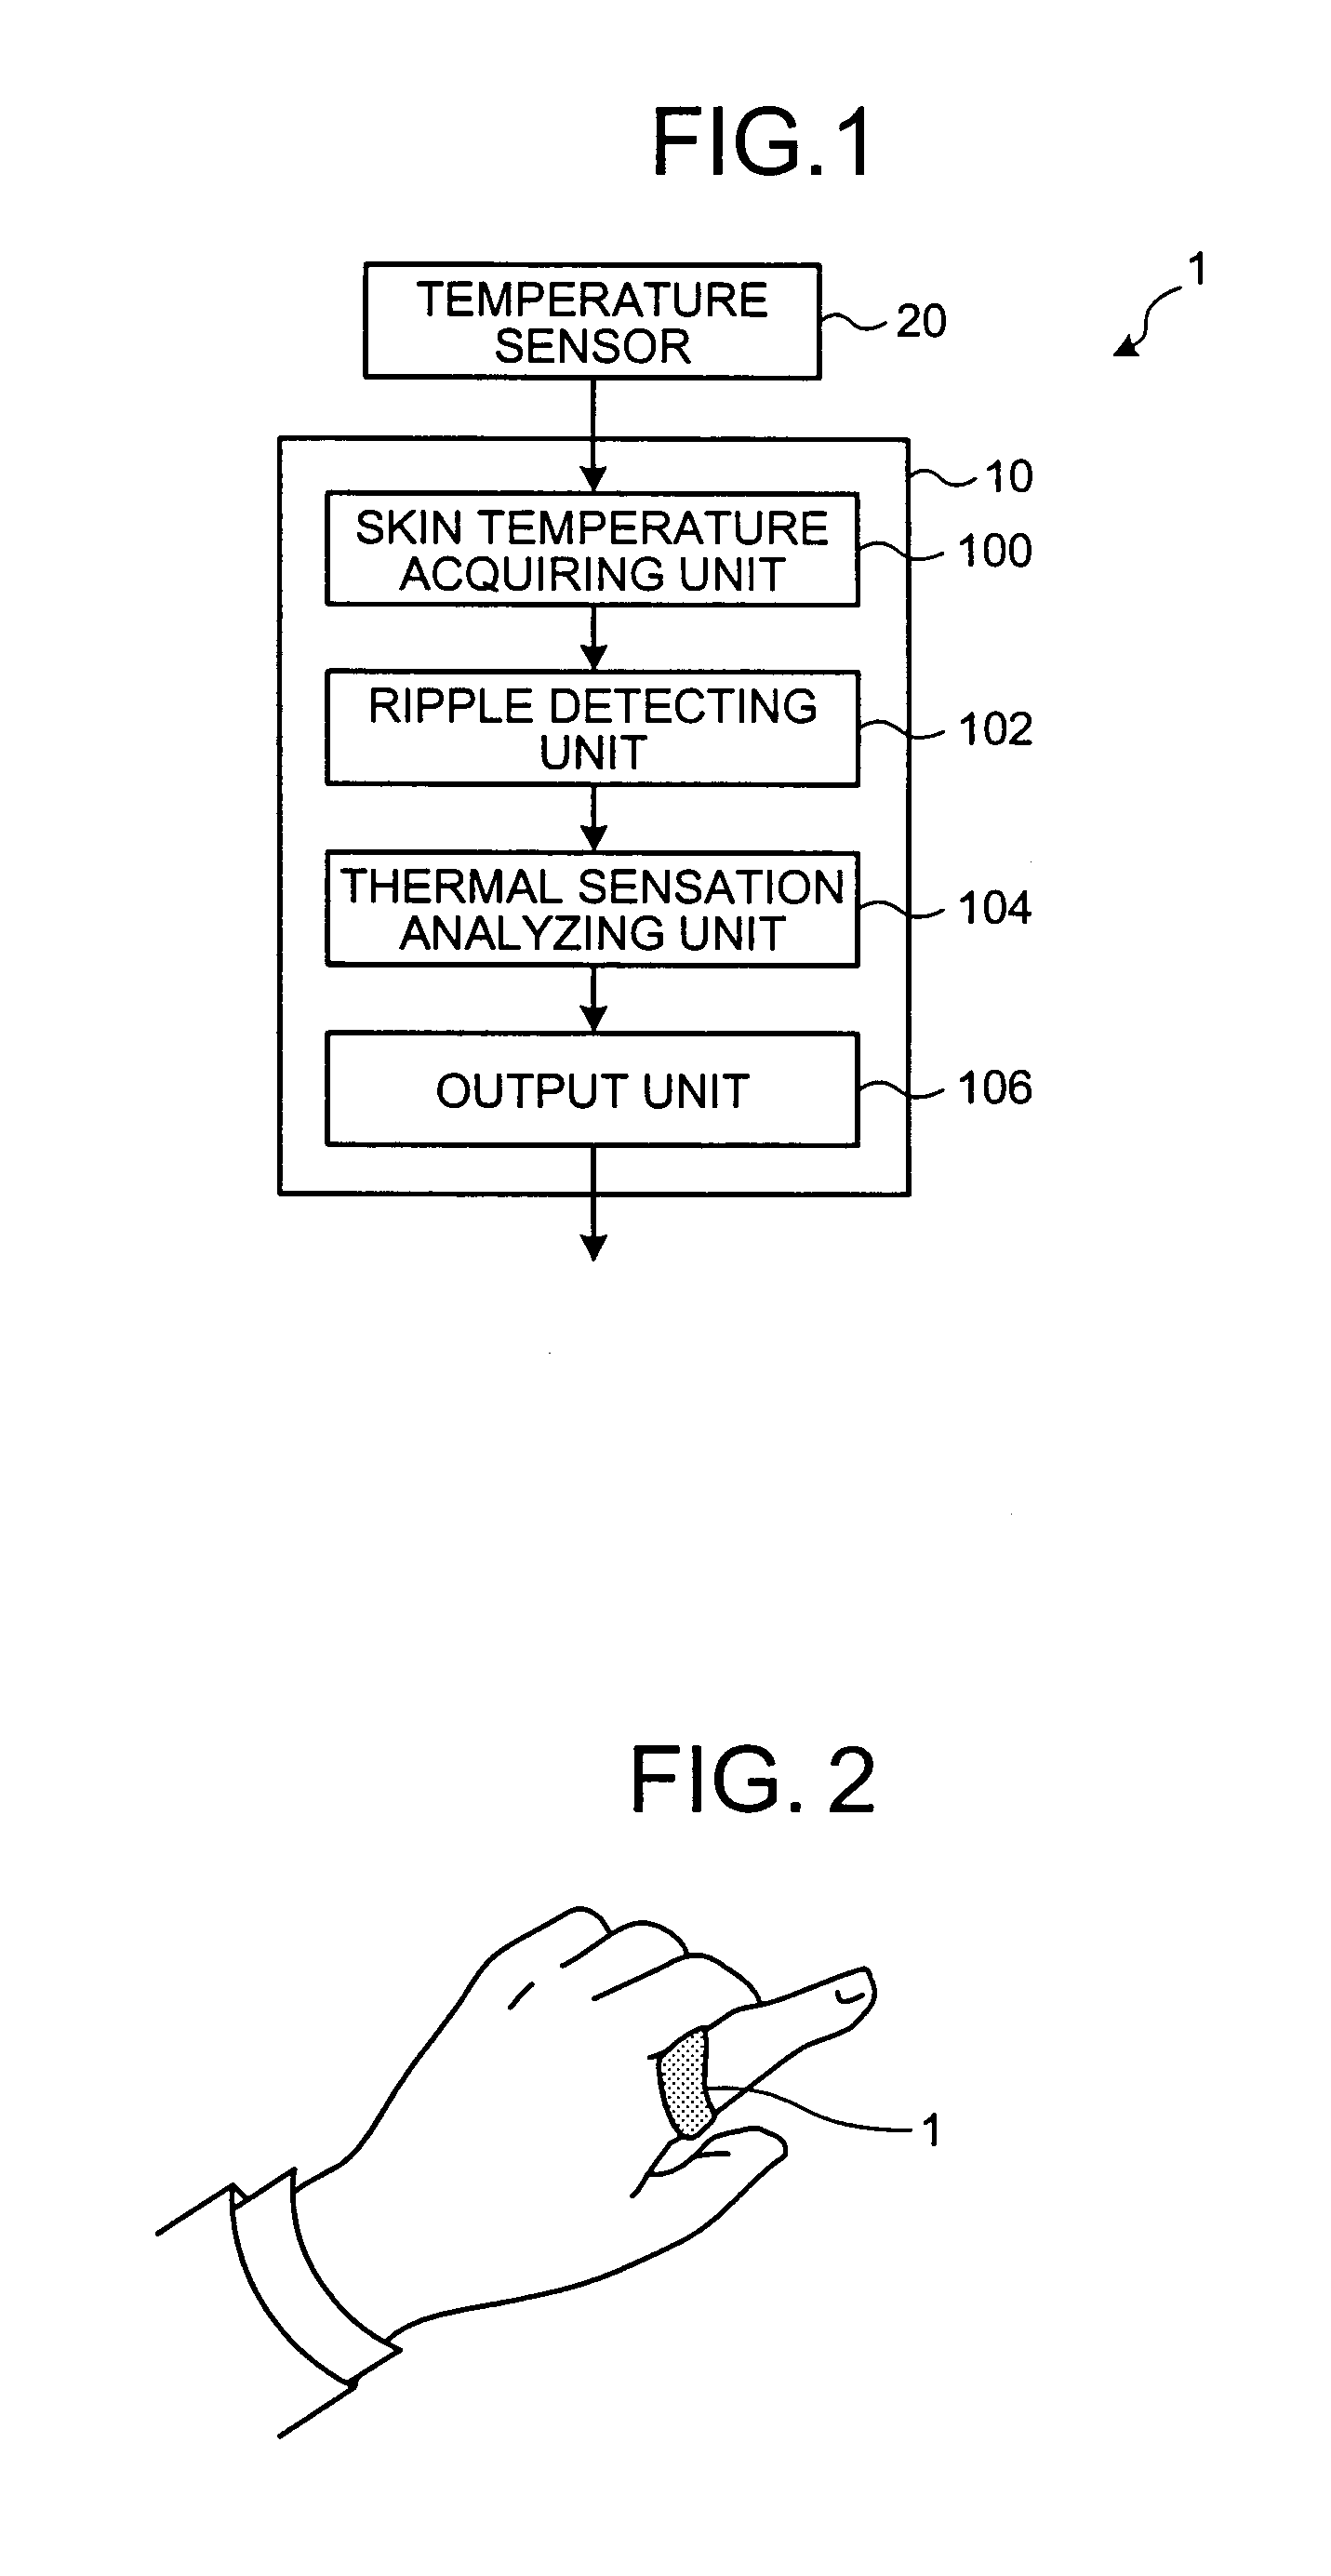 Thermal sensation analyzing device, method, air-conditioning control device, method, and computer program product